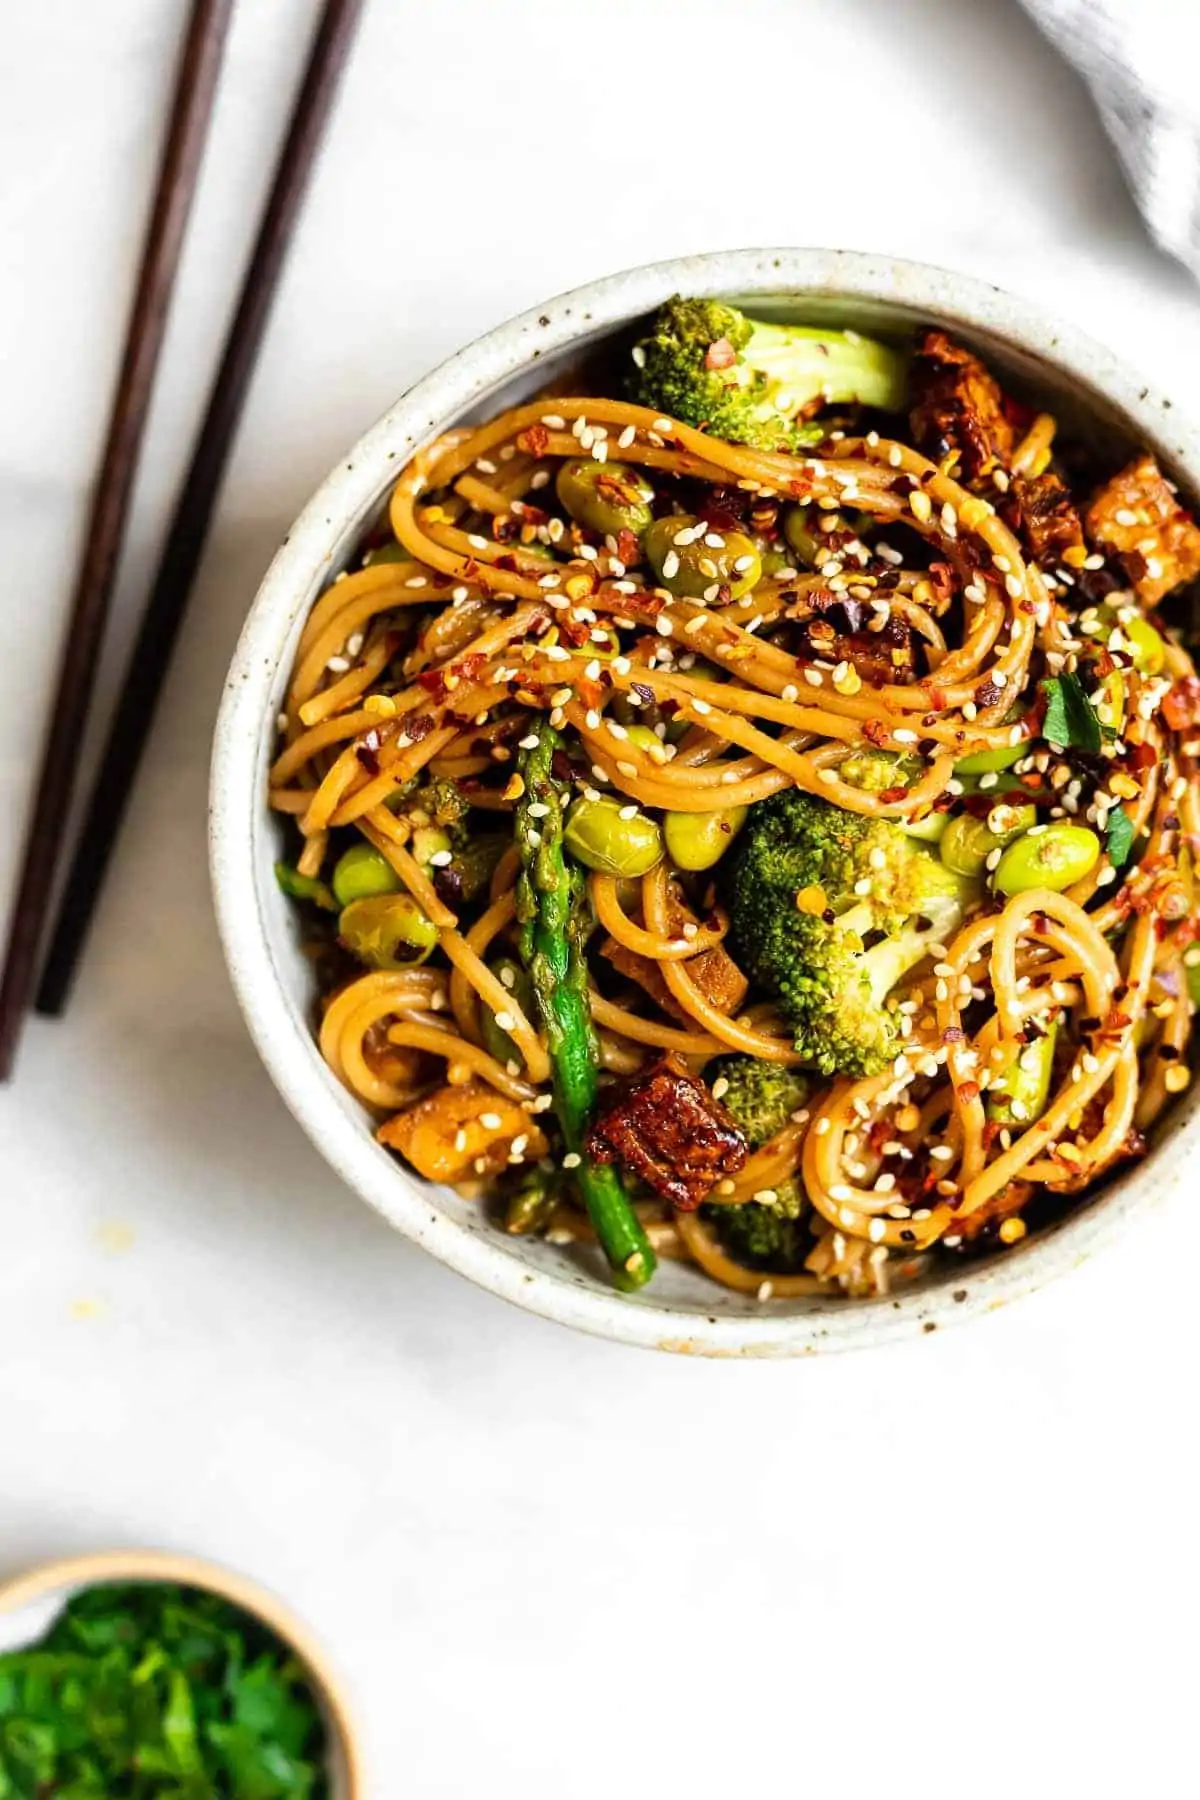 stir fry noodles with broccoli and tofu